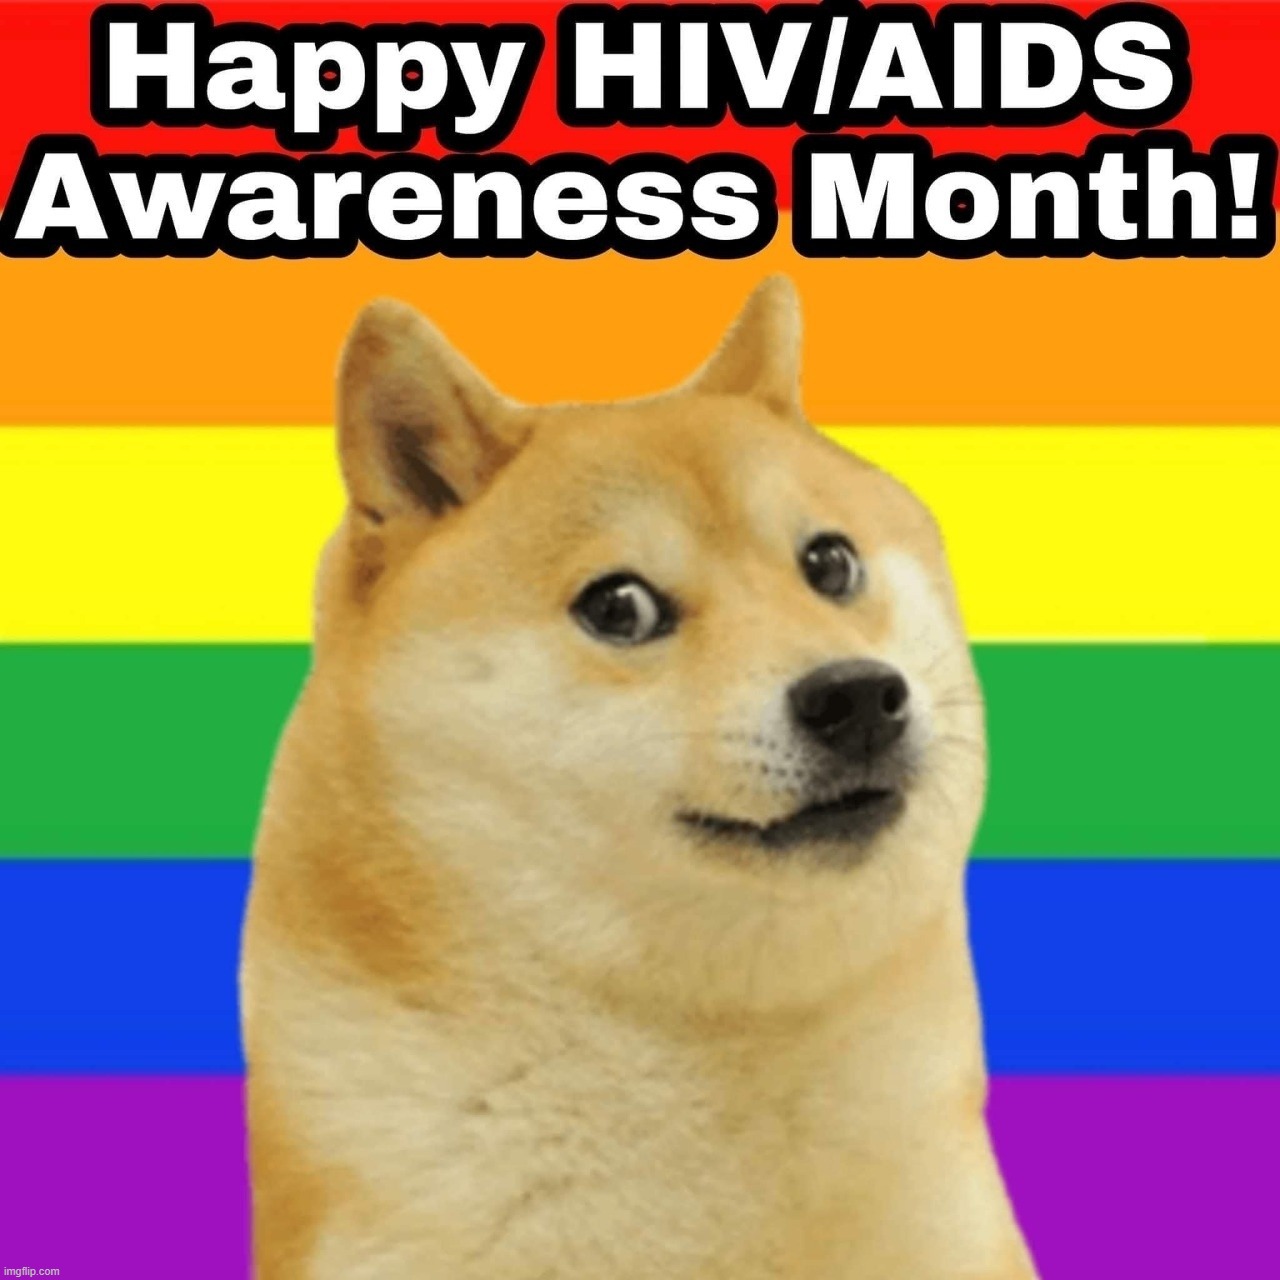 Human Immunodeficiency Virus. Covid has 99.9% survival rate A.I.D.S. does not. Take your Pride with Protection. | image tagged in pride month,aids,hiv,covid,june | made w/ Imgflip meme maker